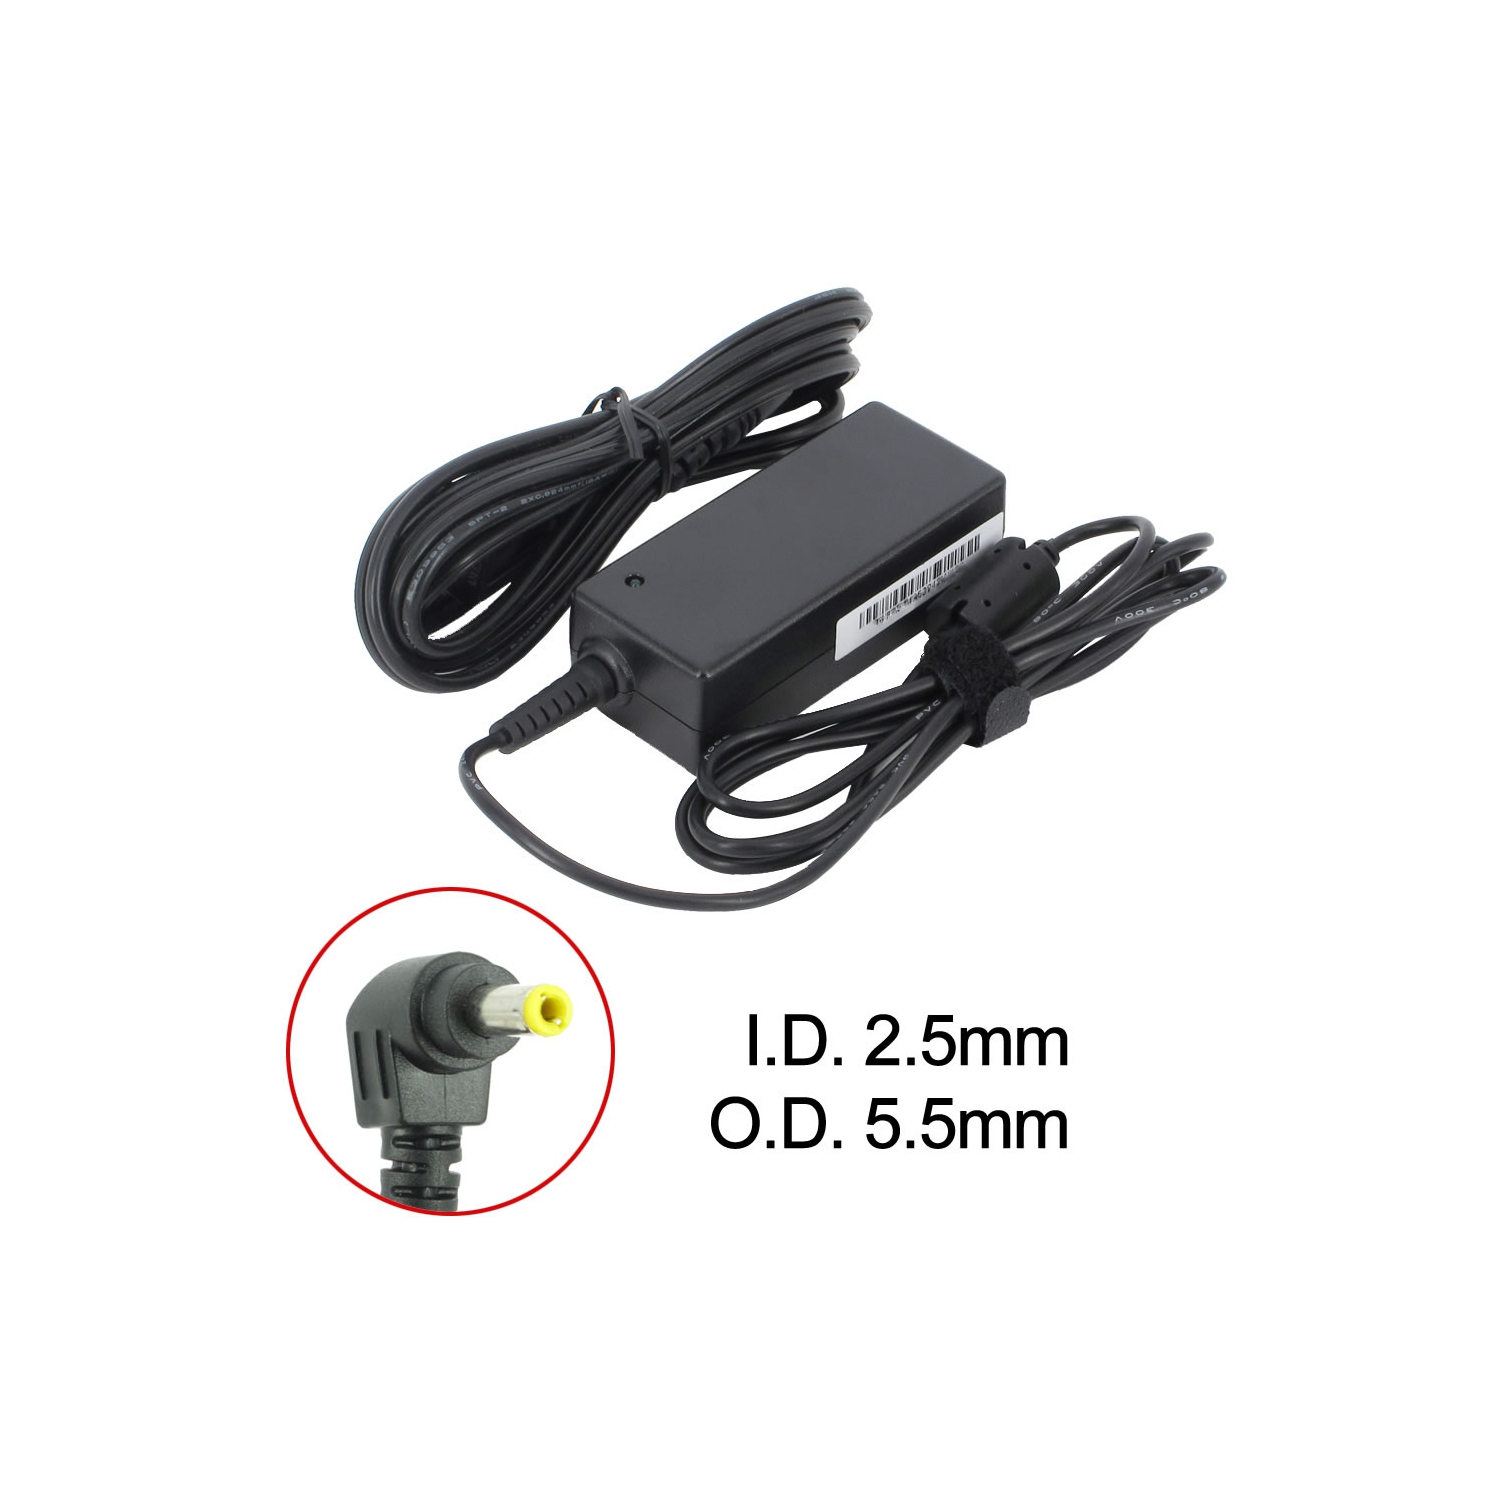 BattDepot: New Laptop AC Adapter for Lenovo 31036038, 0225A2040, 31037975, 41R4445, 45K1746, 55Y9365, 57Y6365, LN-A0403A3C